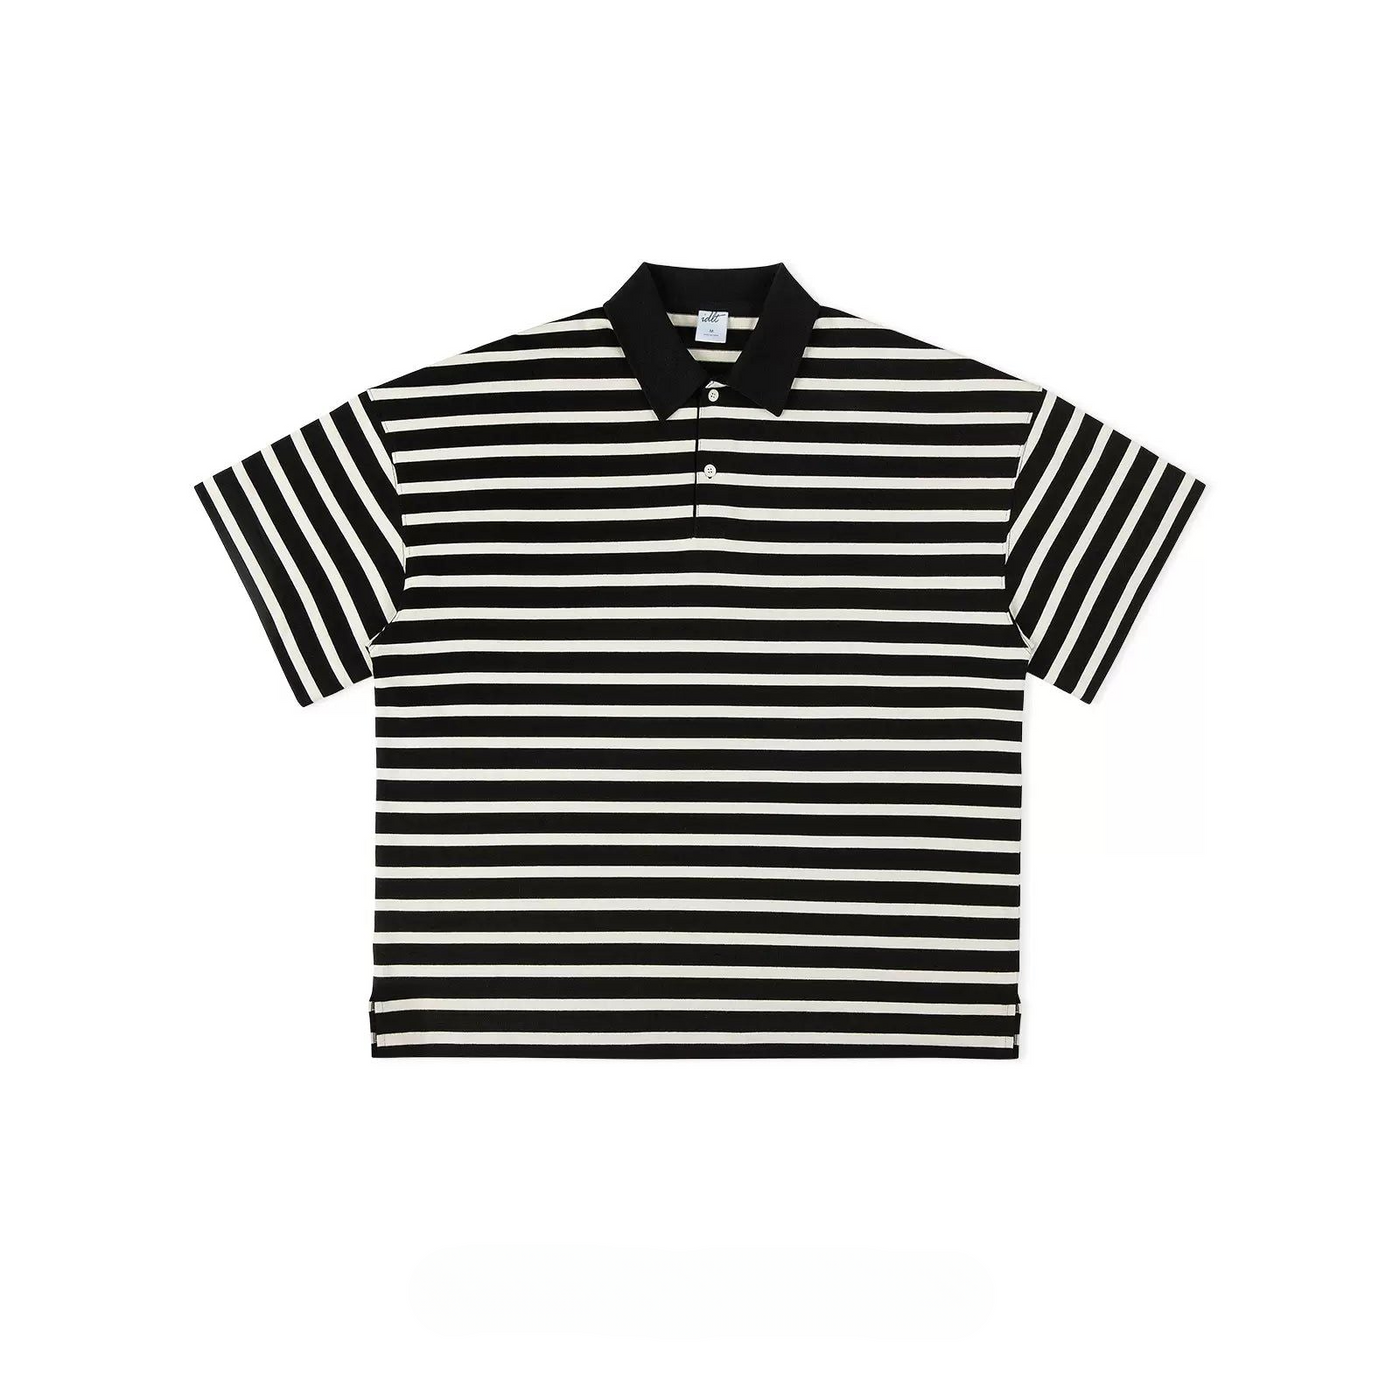 Regular Fit Striped Polo Korean Street Fashion Polo By IDLT Shop Online at OH Vault